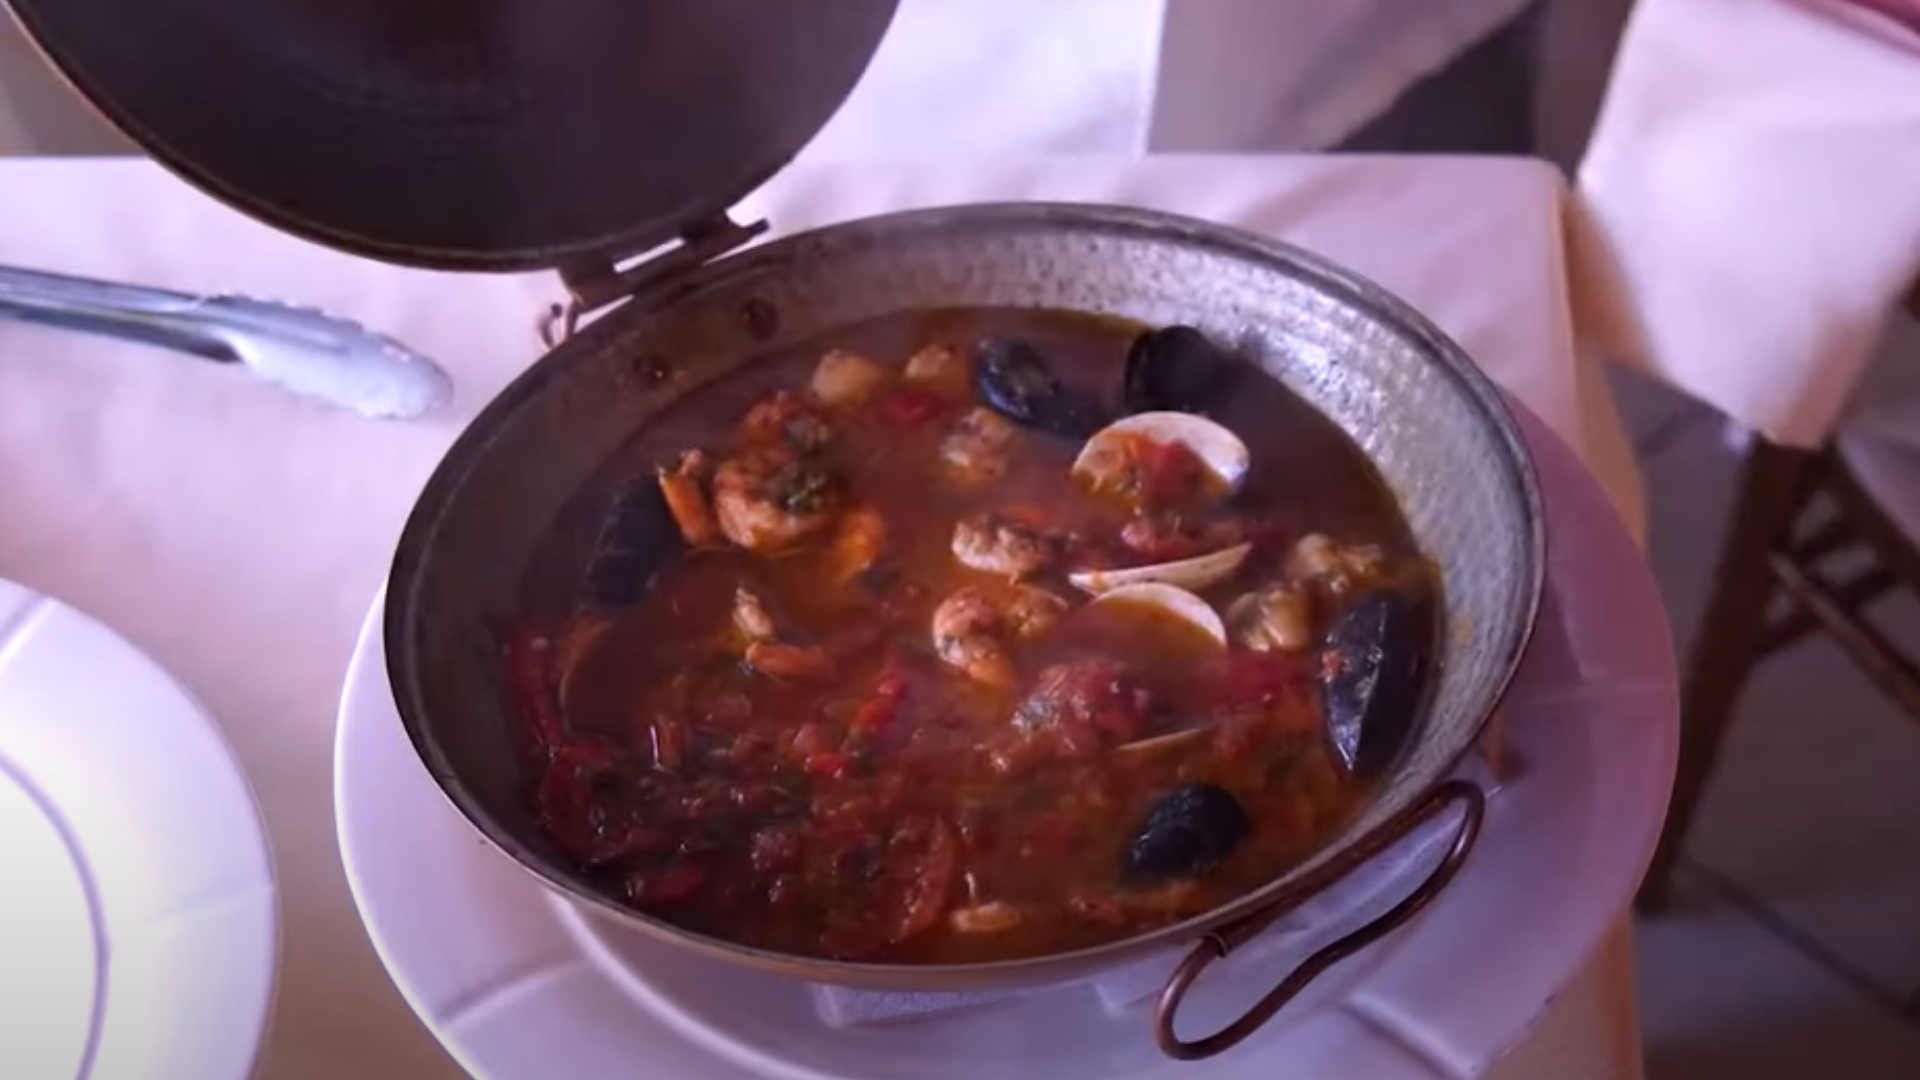 11Alive goes into the kitchen at Emidio's Restaurant to learn the secrets of traditional Portuguese cuisine.